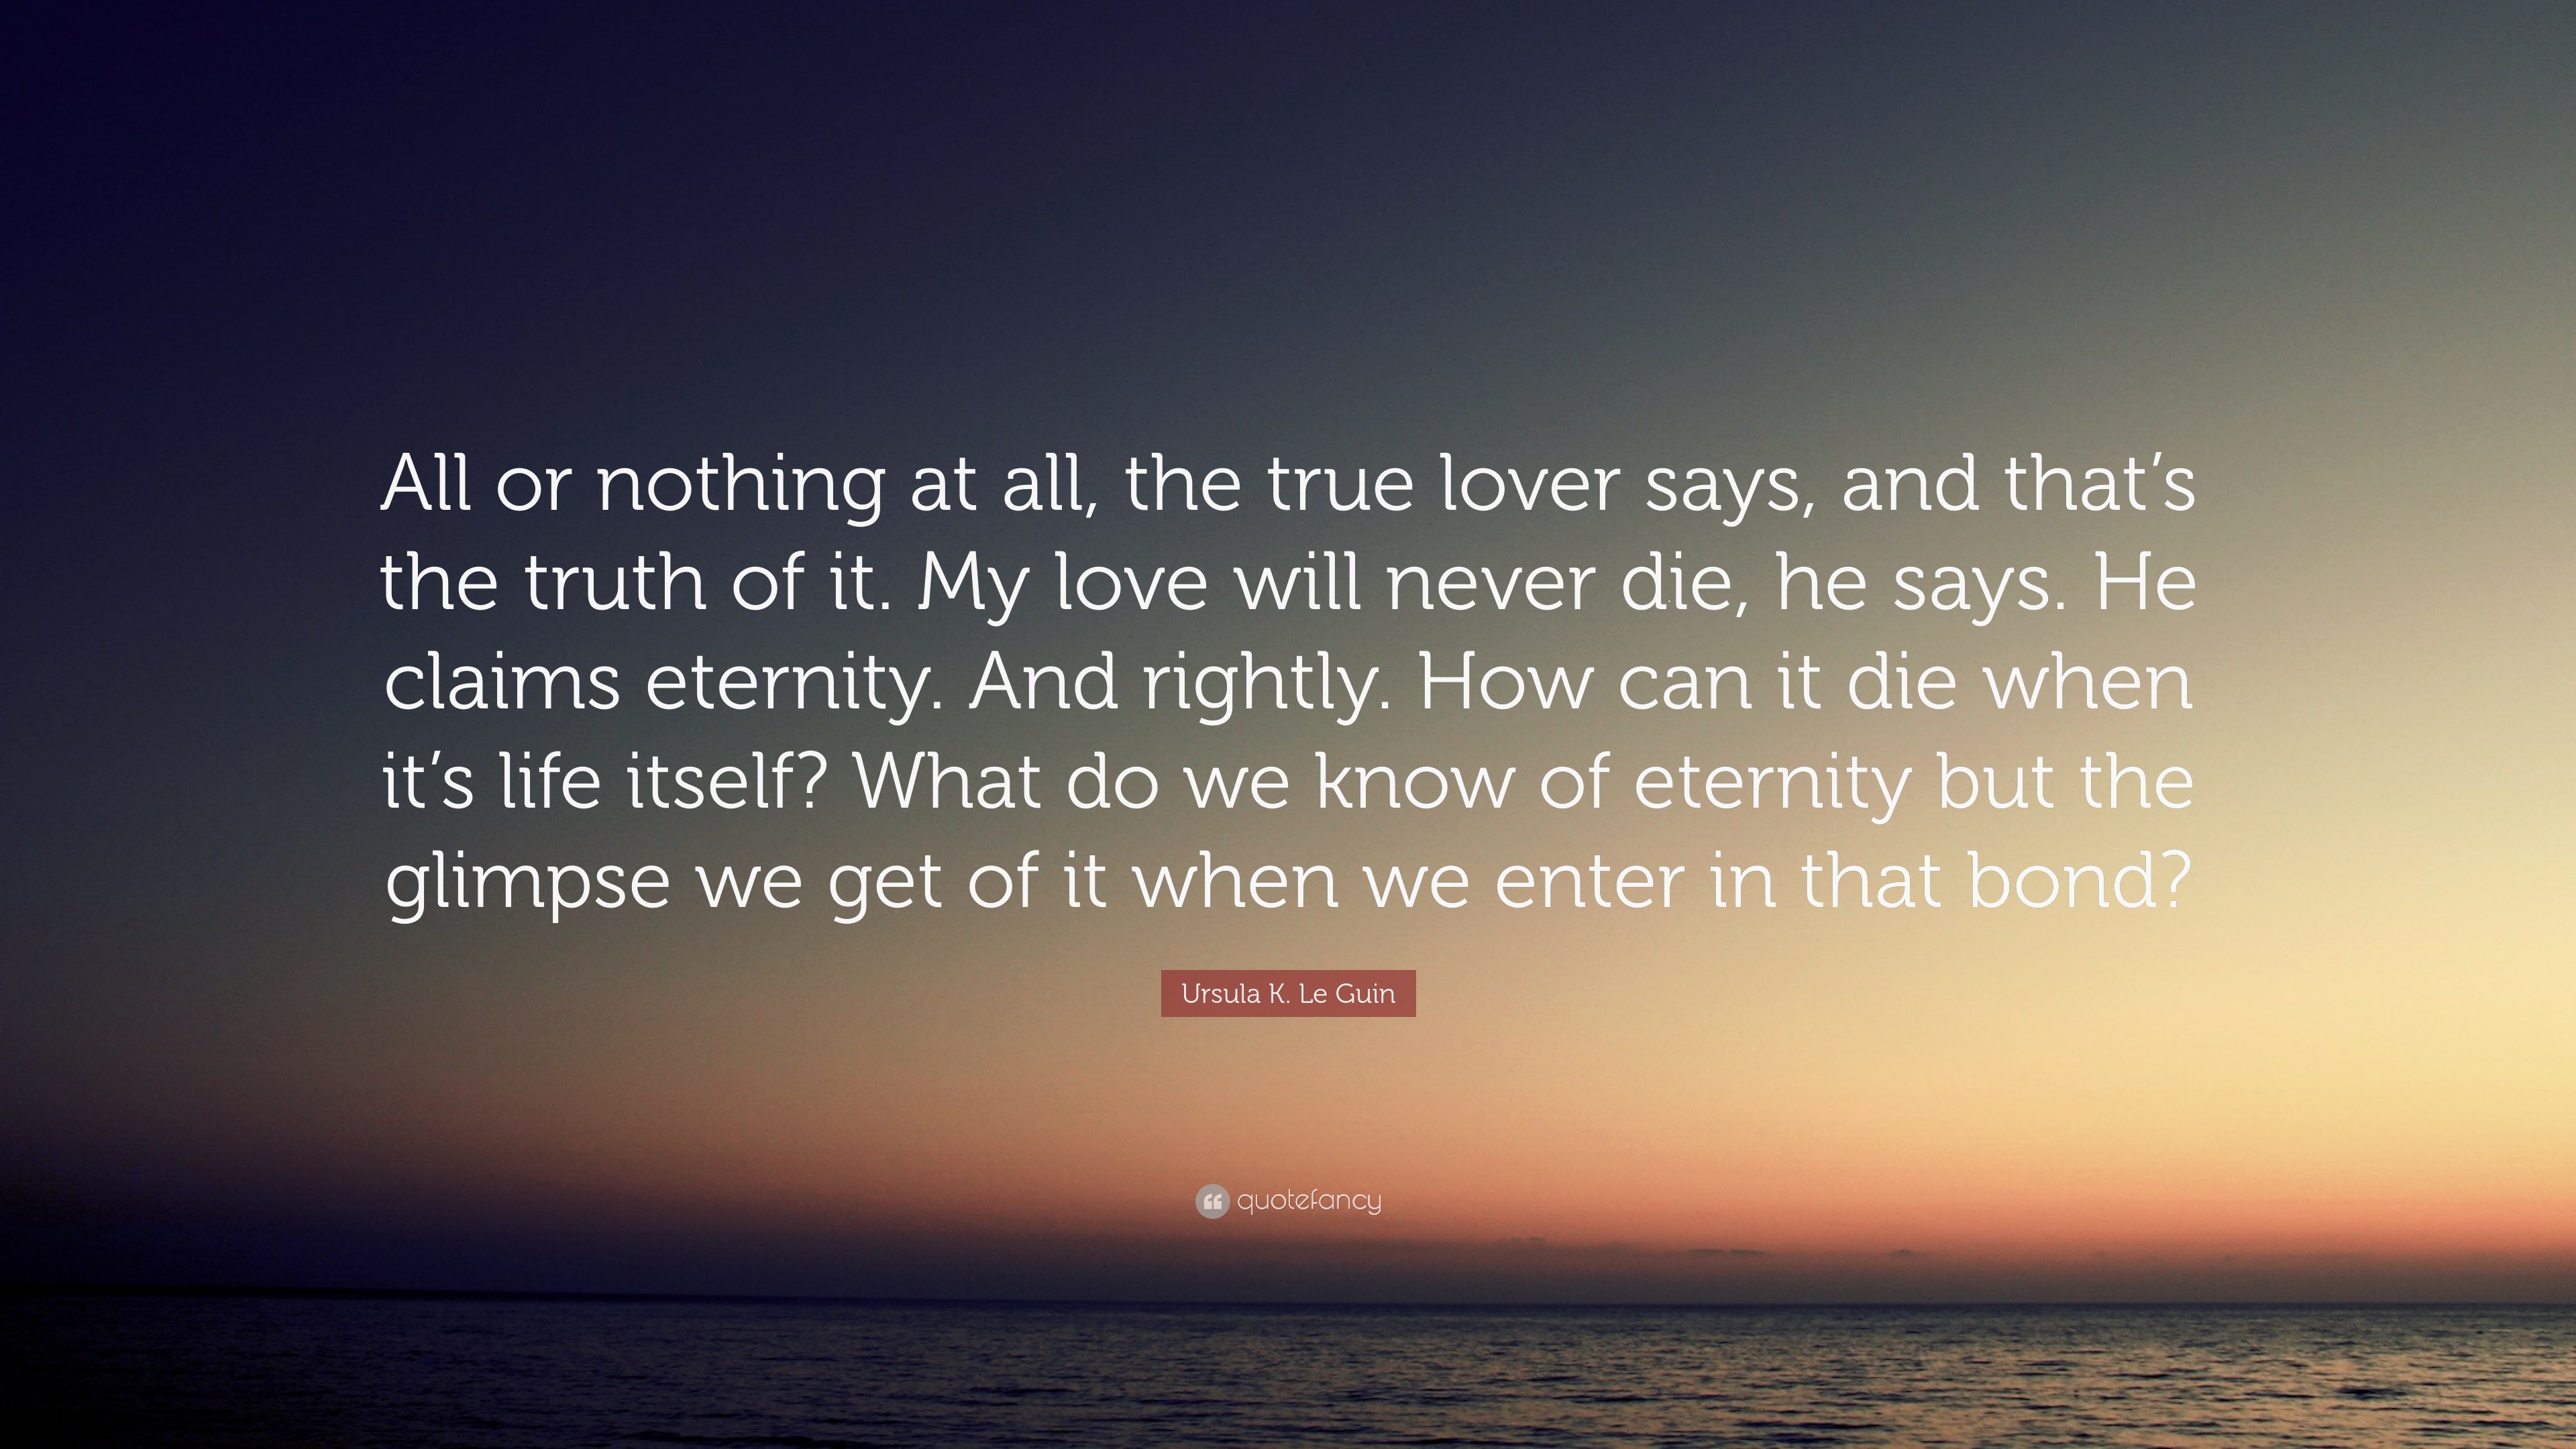 Ursula K. Le Guin Quote: “All or nothing at all, the true lover